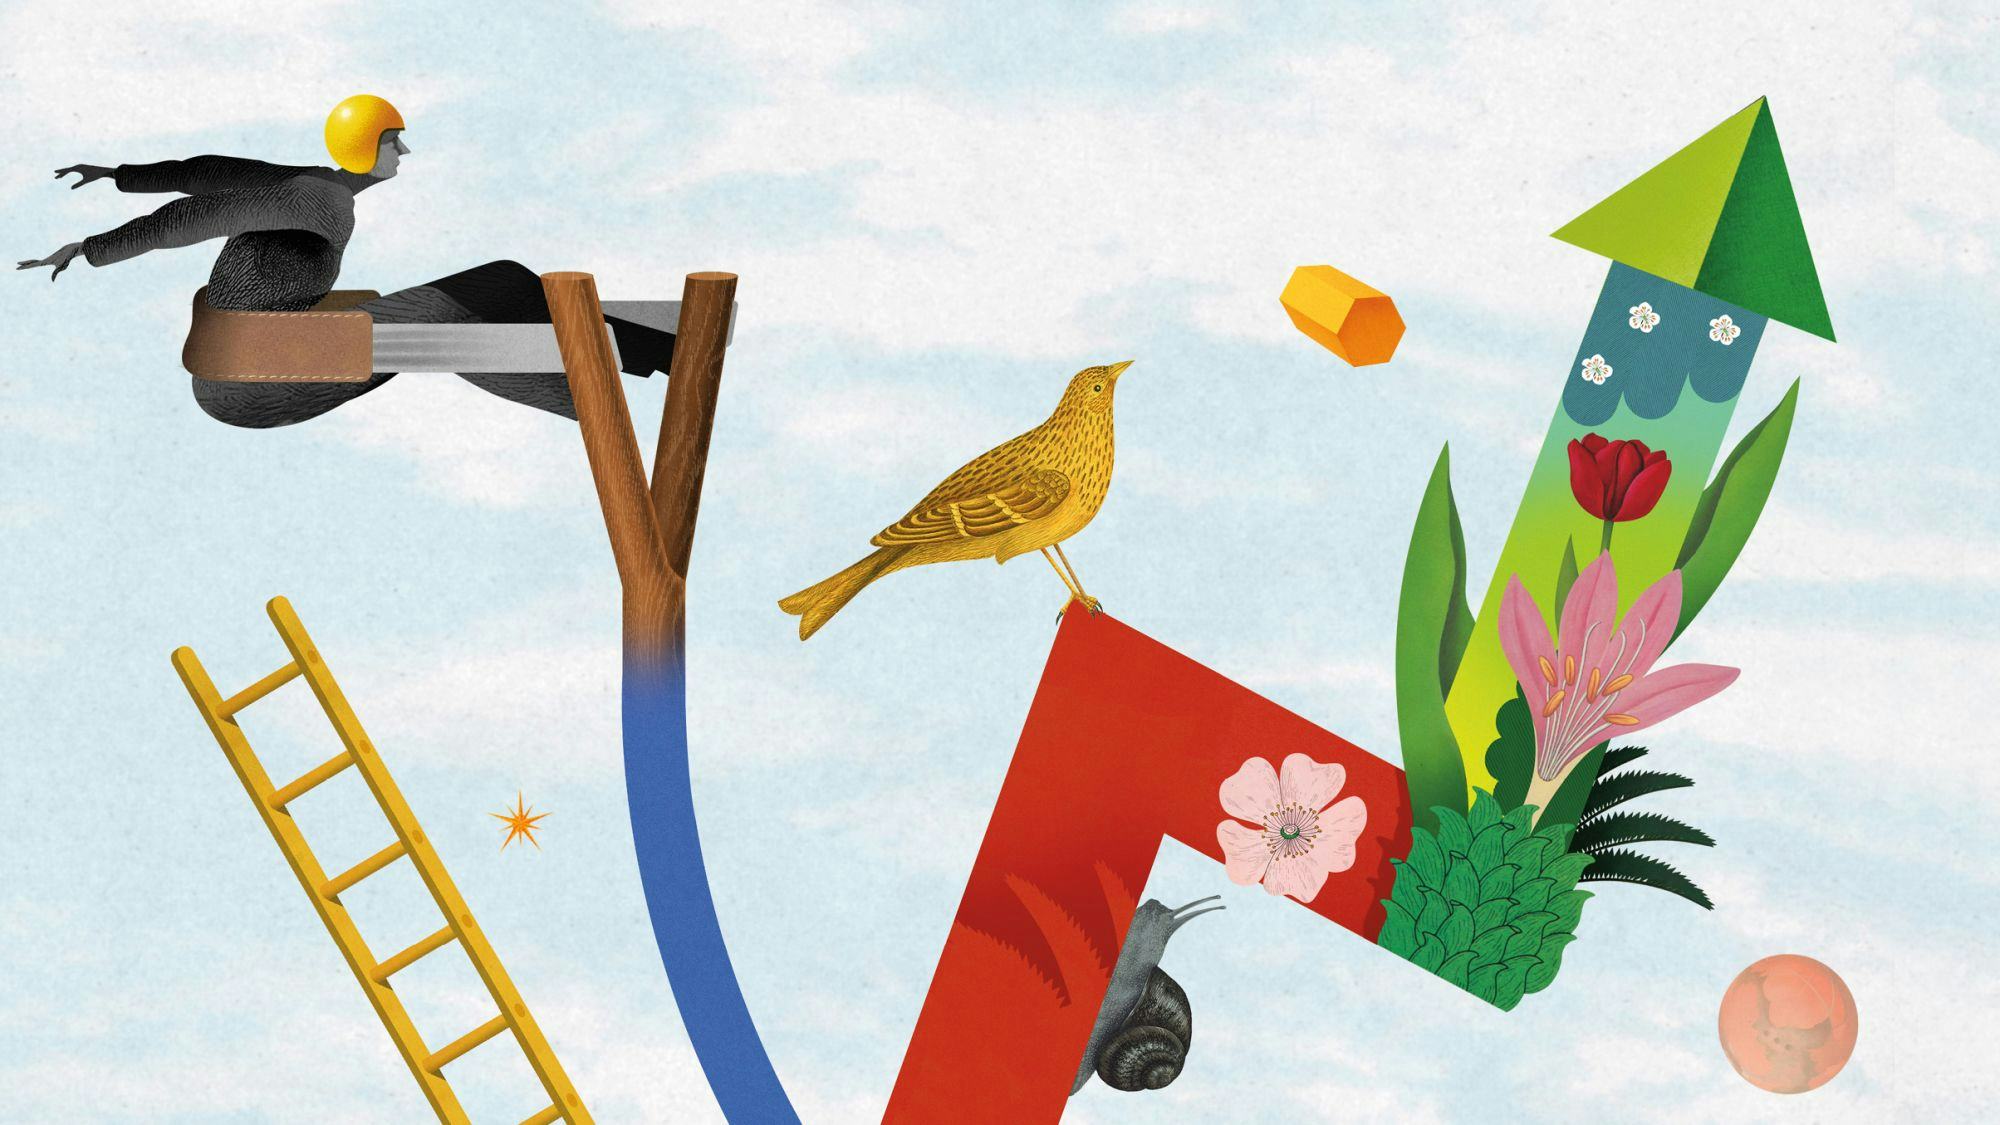 Collage illustration of a person with a helmet in a slingshot and a line chart with flowers and birds